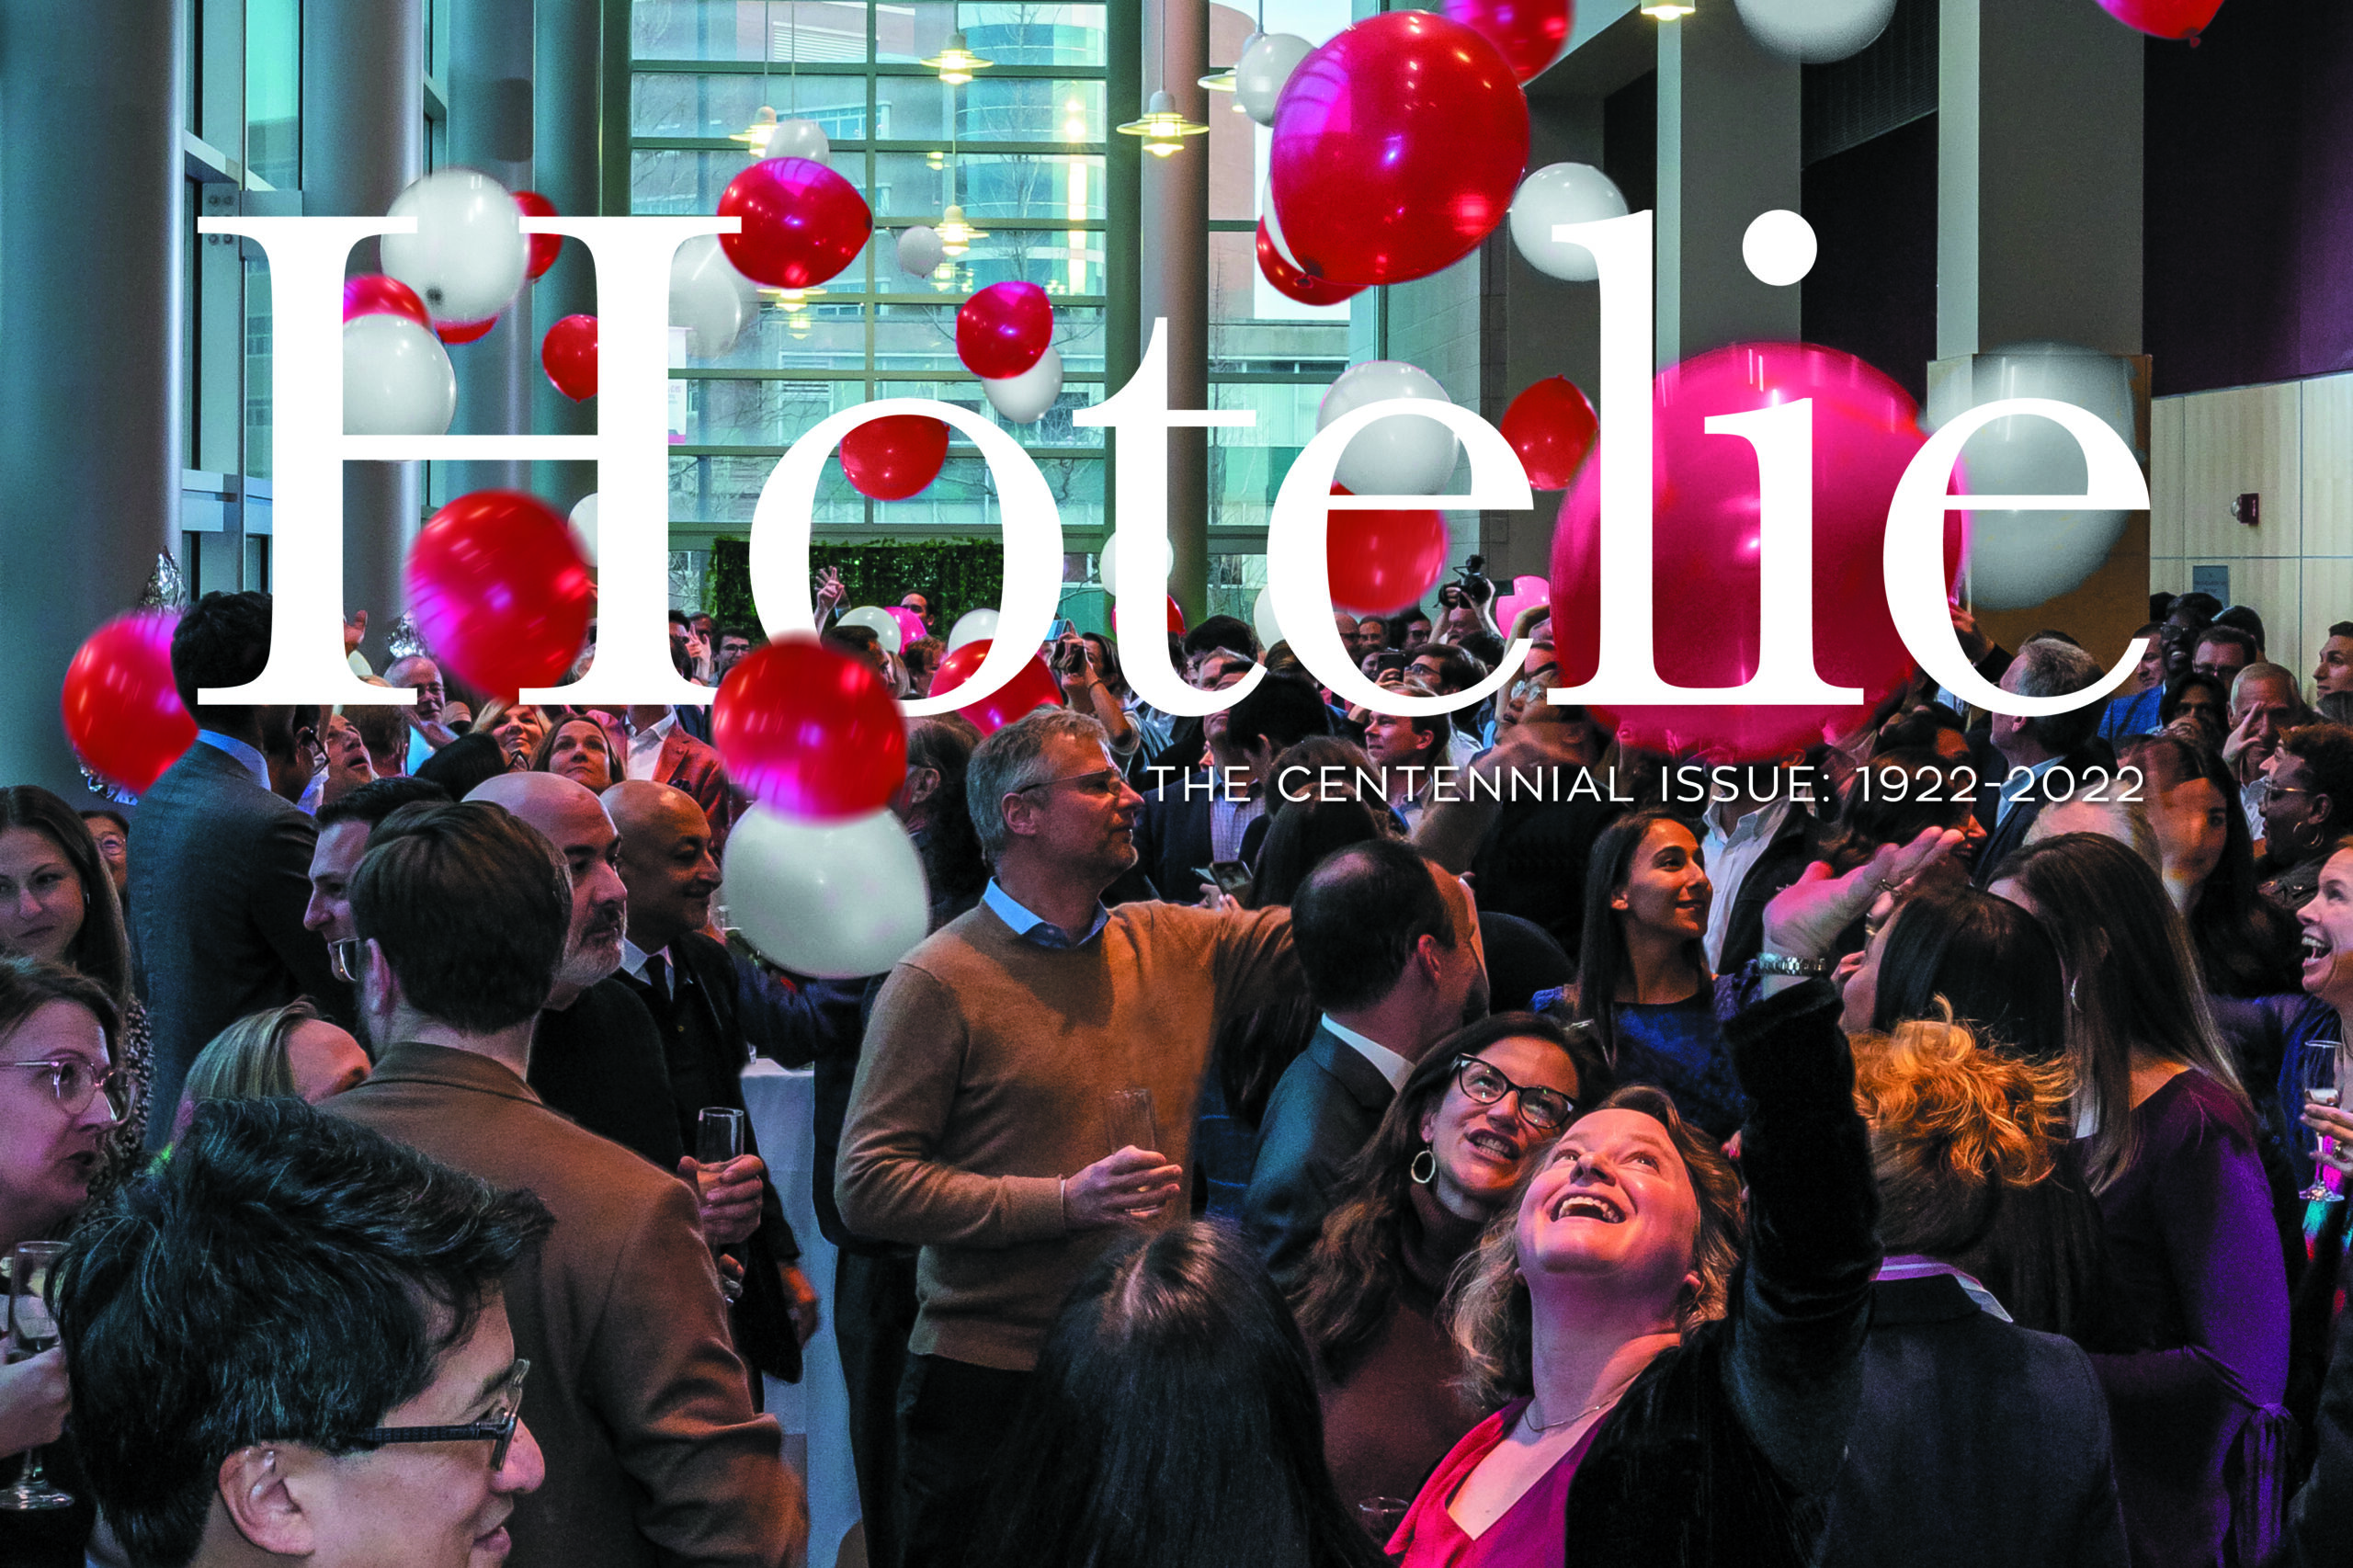 Cover of Hotelie Magazine, showing a crowd with red and white balloons.